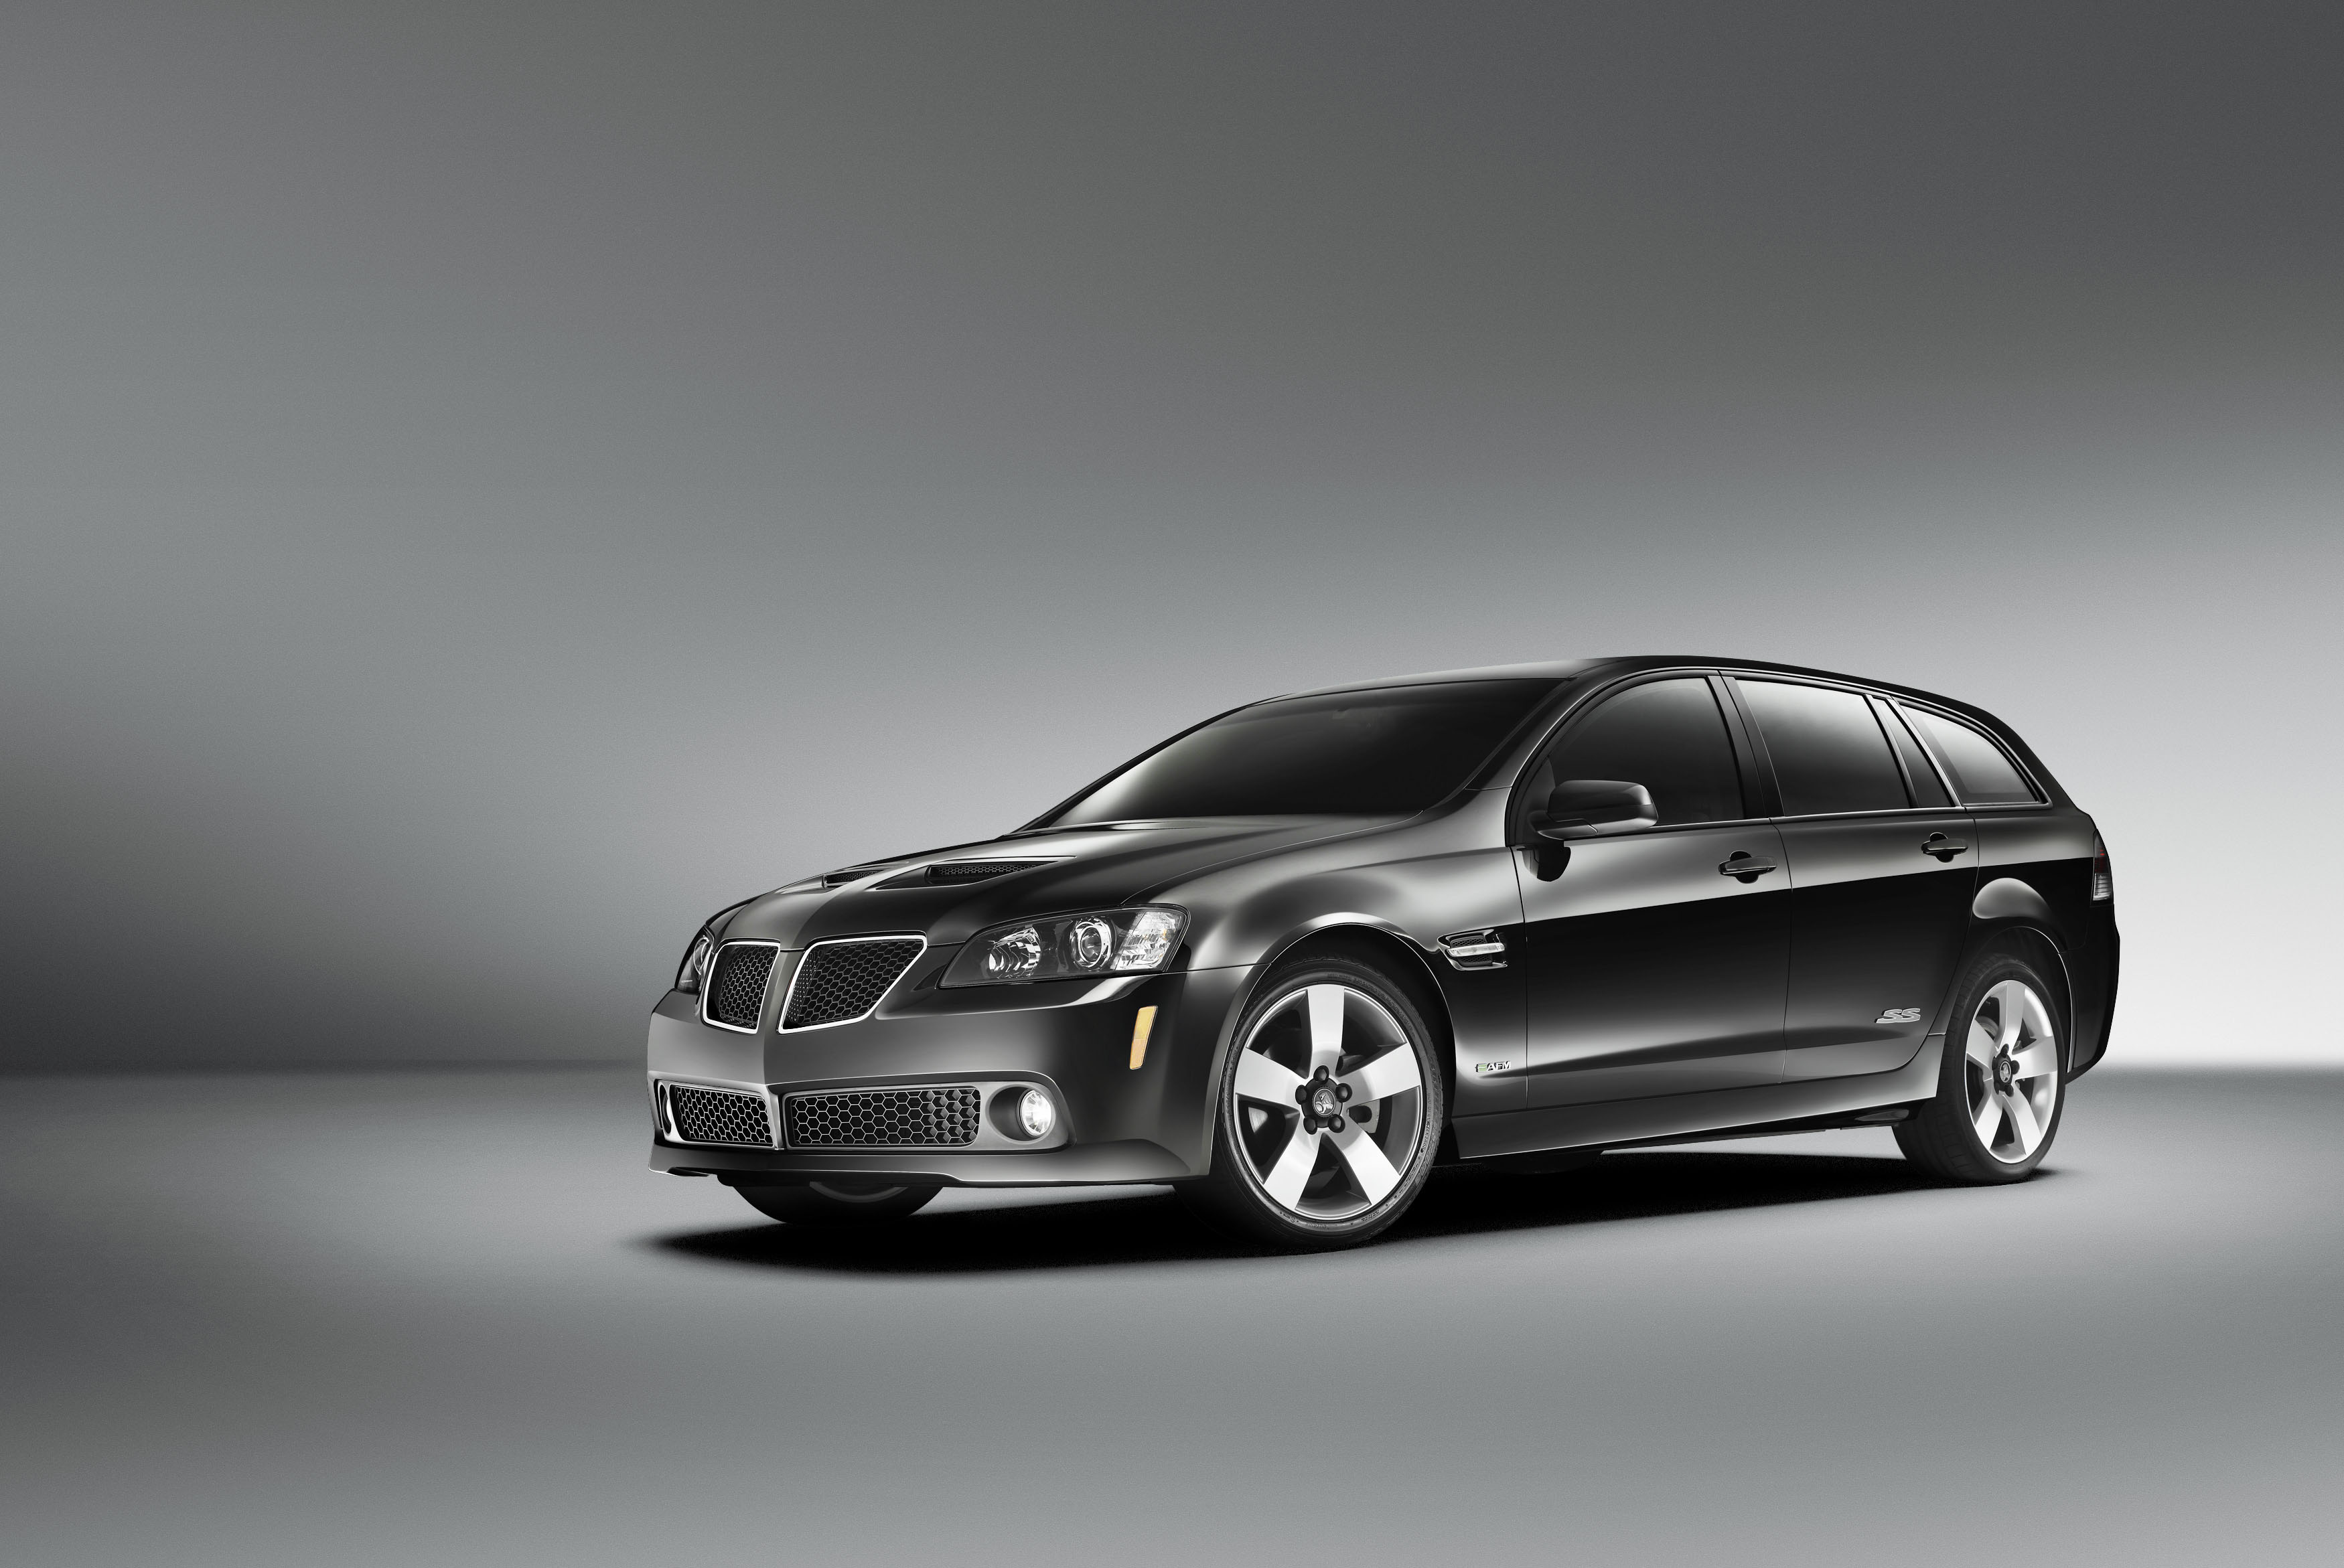 Holden Commodore Ss V Series , HD Wallpaper & Backgrounds